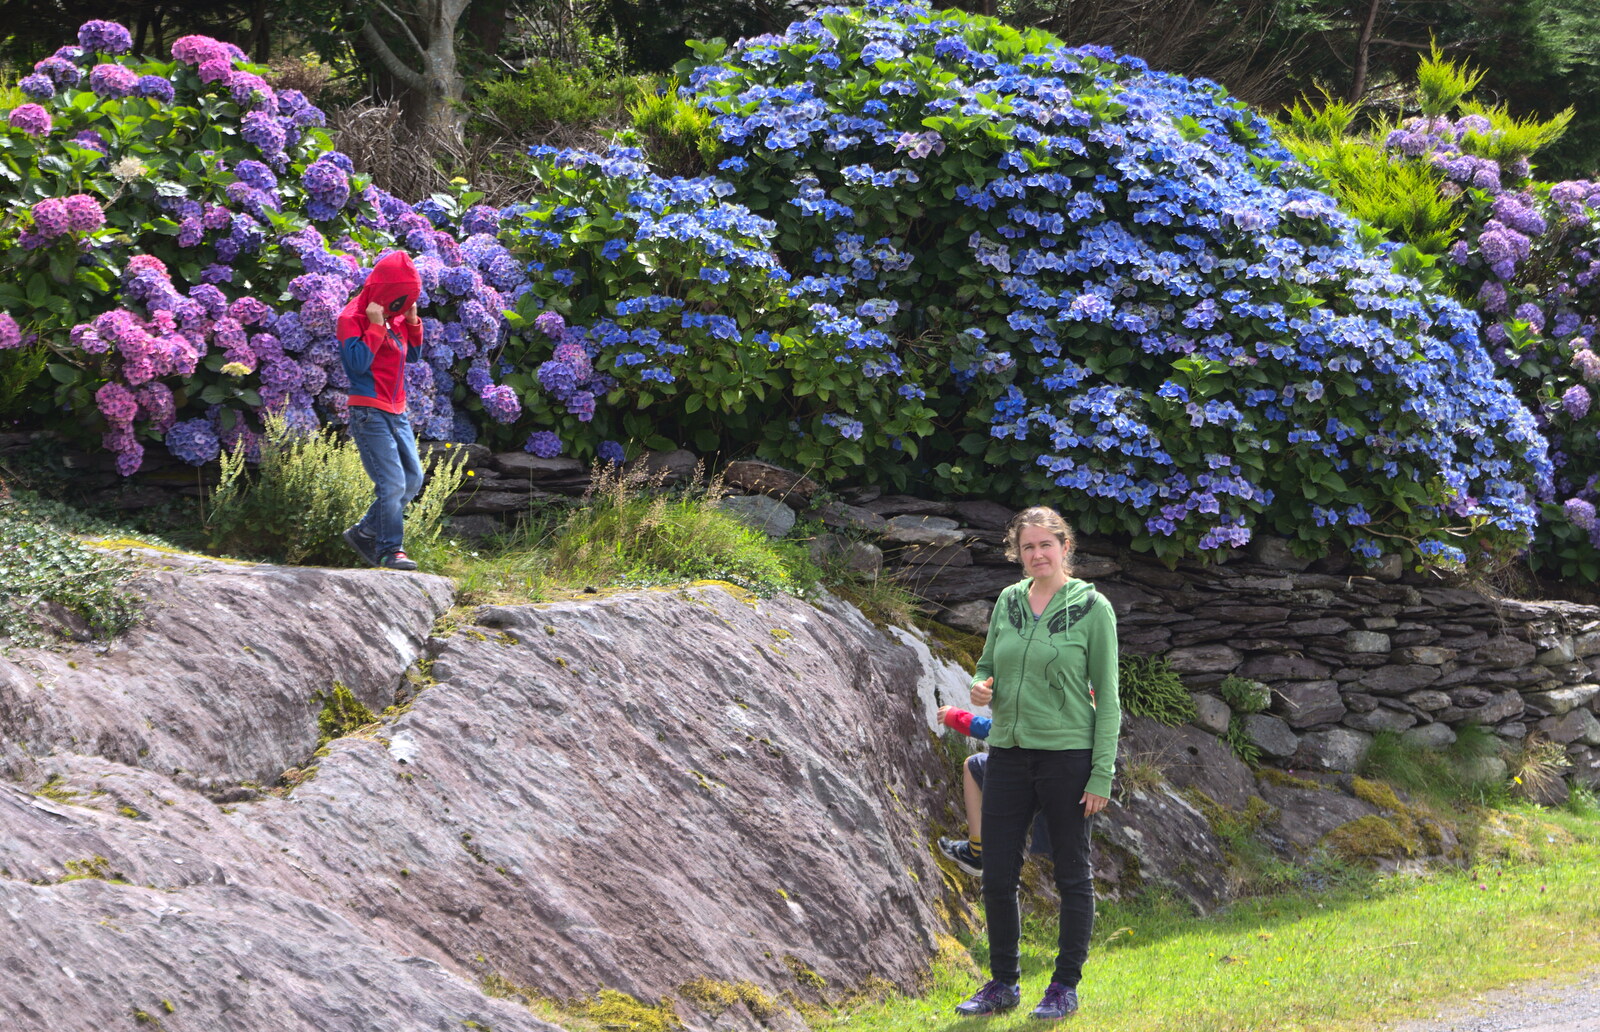 Harry as Spider-Man inspects some Hydrangeas from Baile an Sceilg to An tSnaidhme, Co. Kerry, Ireland - 31st July 2017